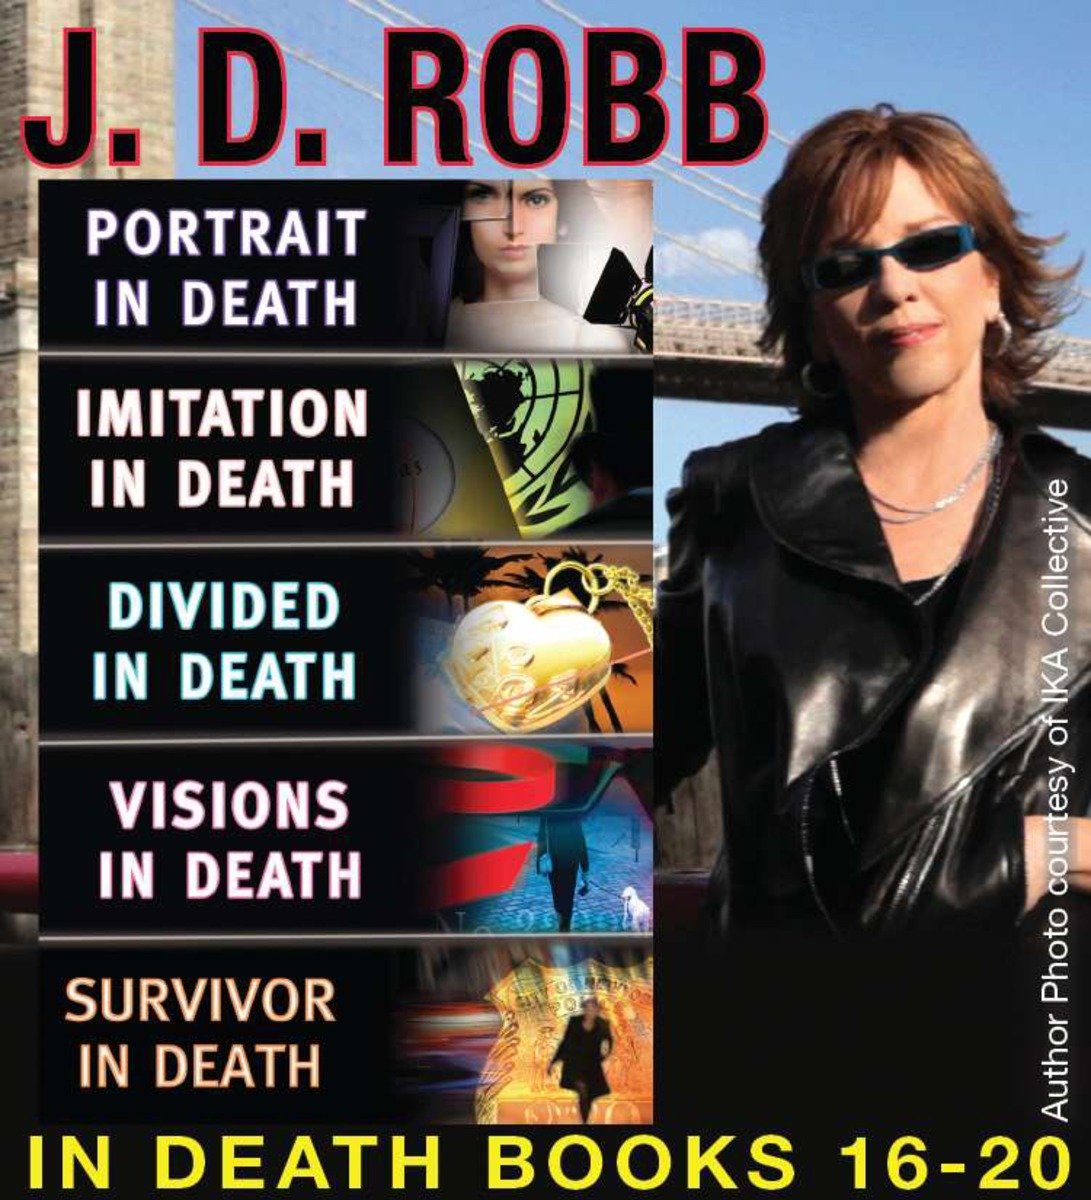 J.D. Robb  The in death collection books 16-20 cover image